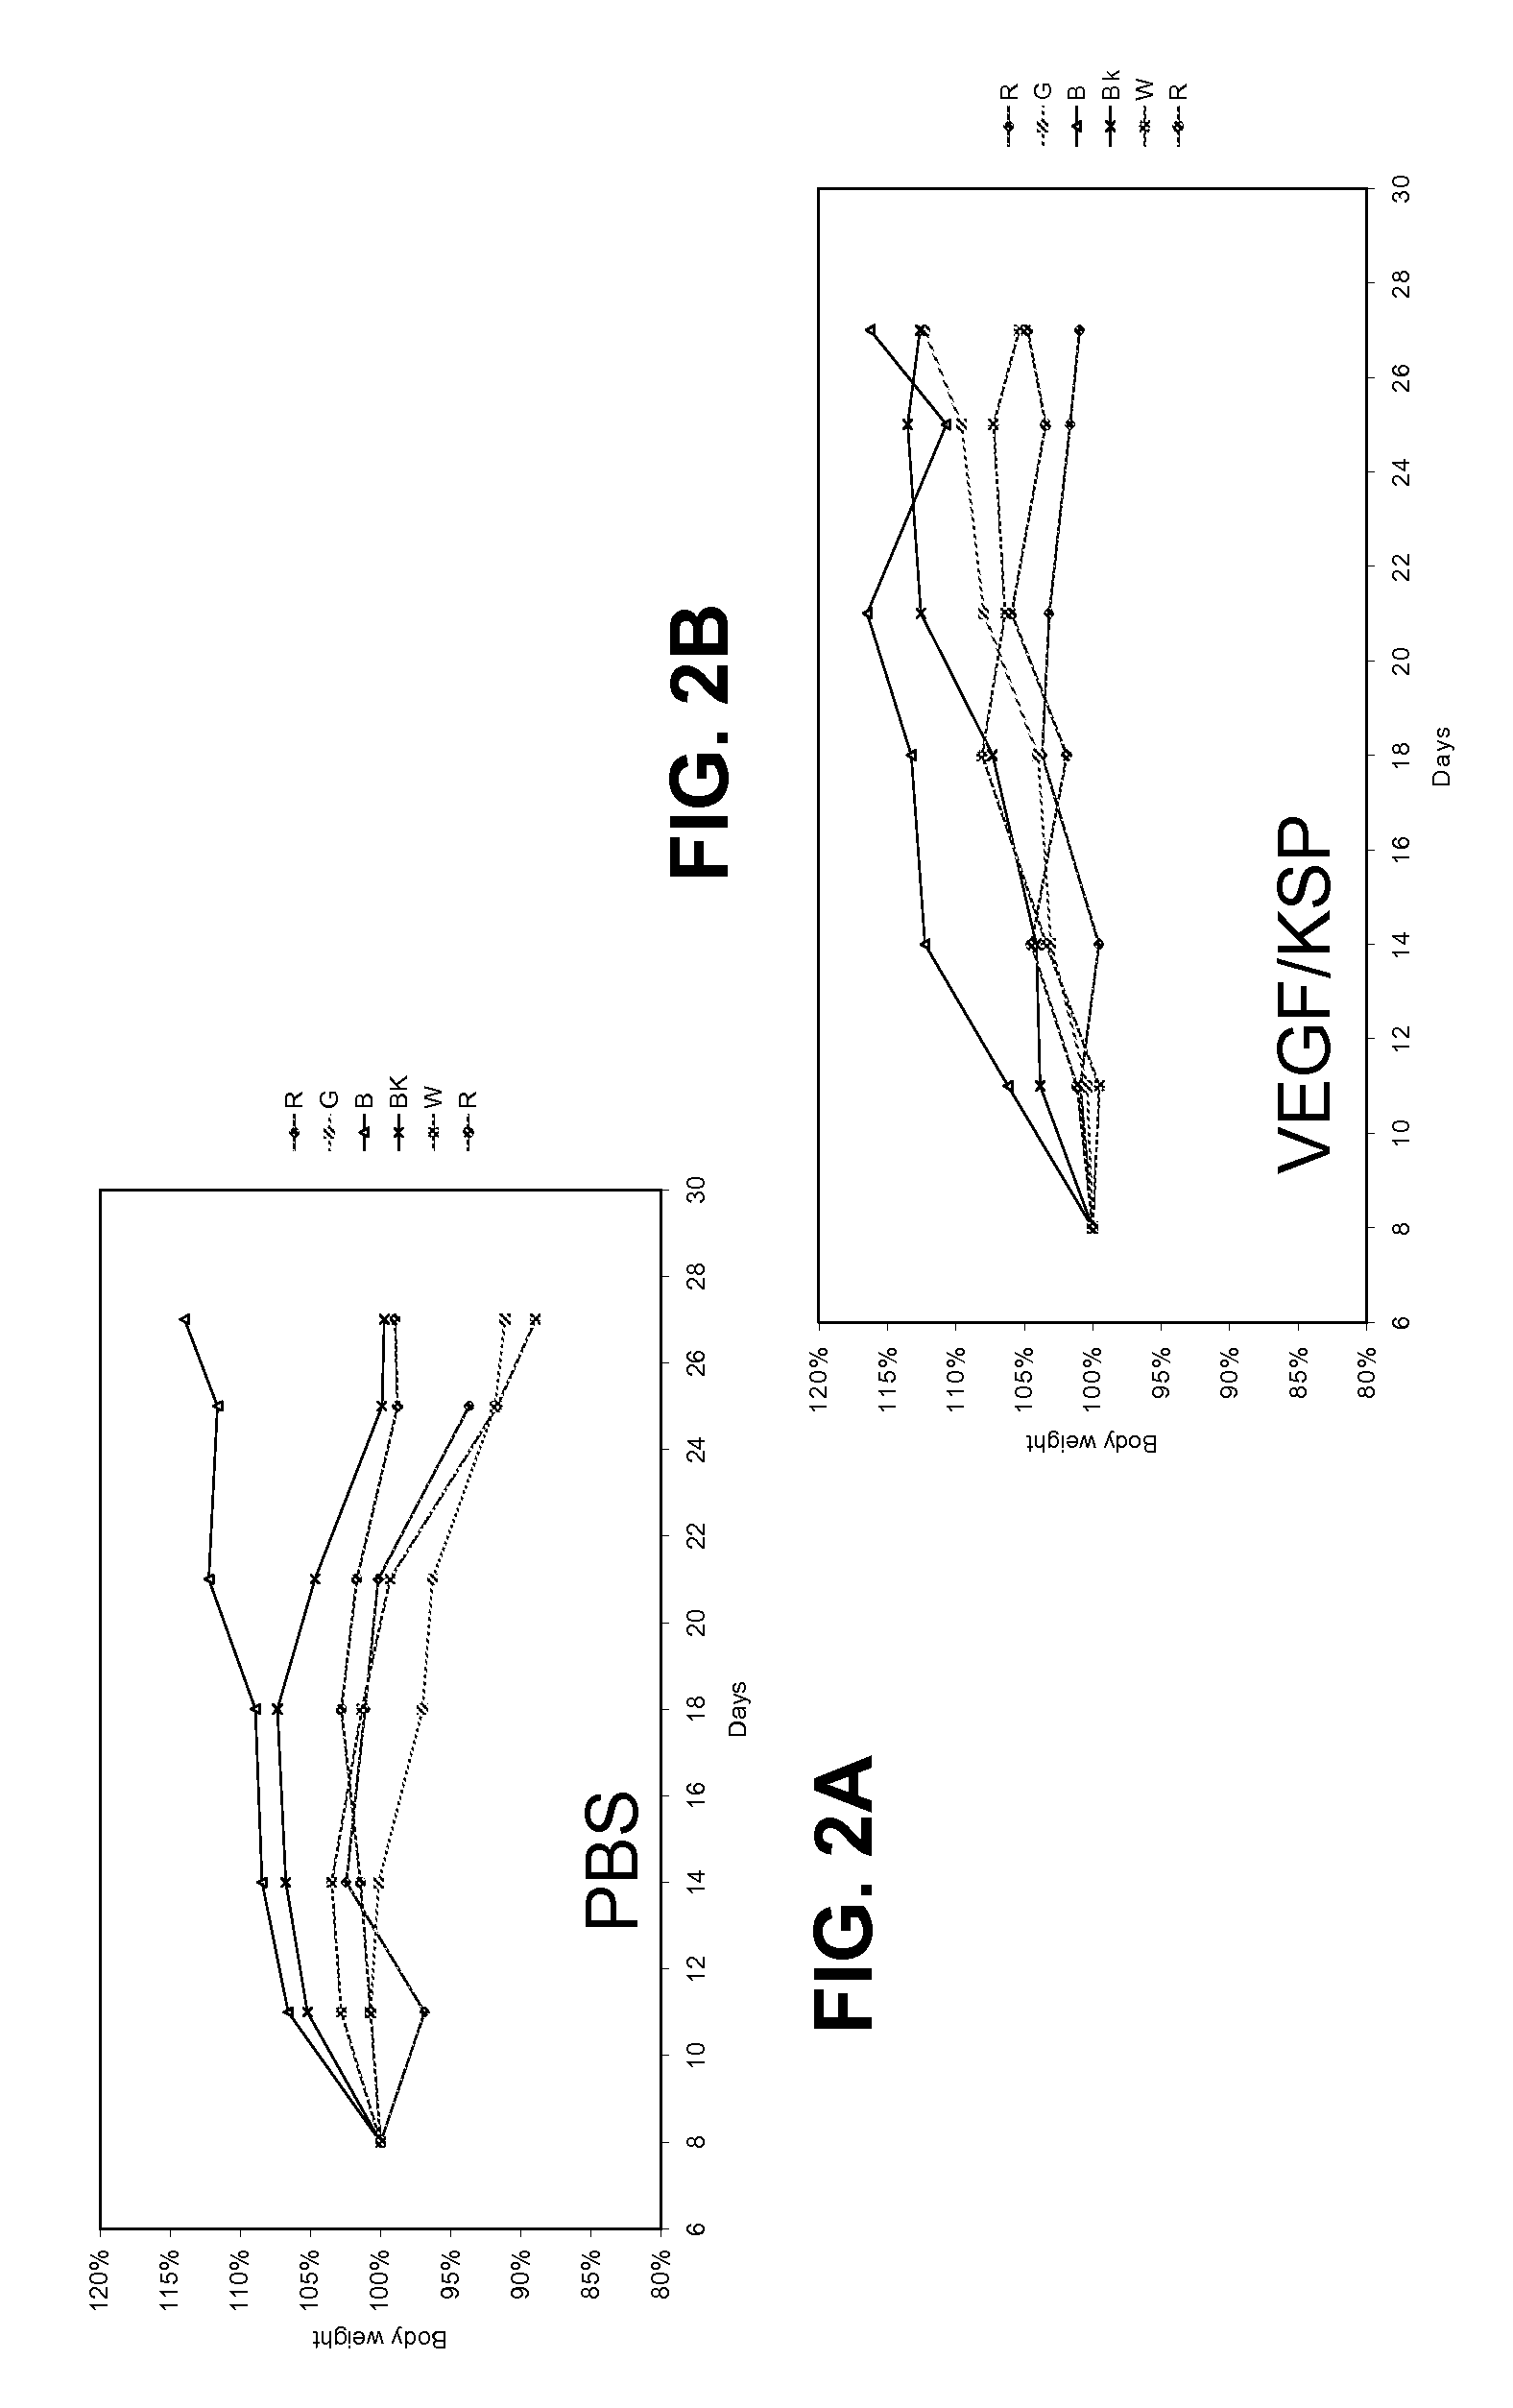 Lipid formulated compositions and methods for inhibiting expression of Eg5 and VEGF genes